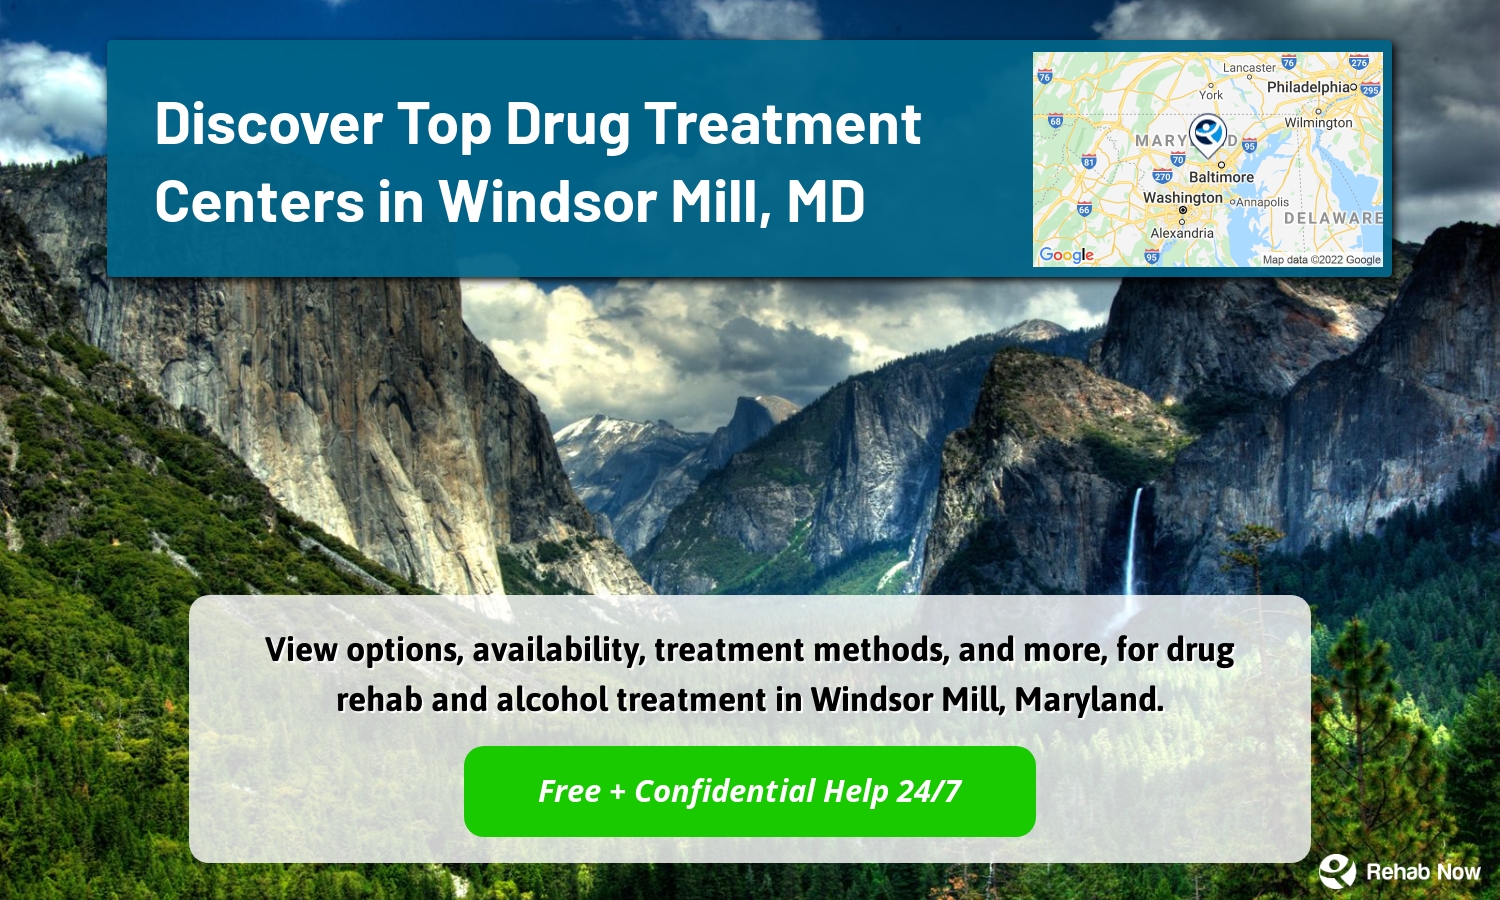 View options, availability, treatment methods, and more, for drug rehab and alcohol treatment in Windsor Mill, Maryland.